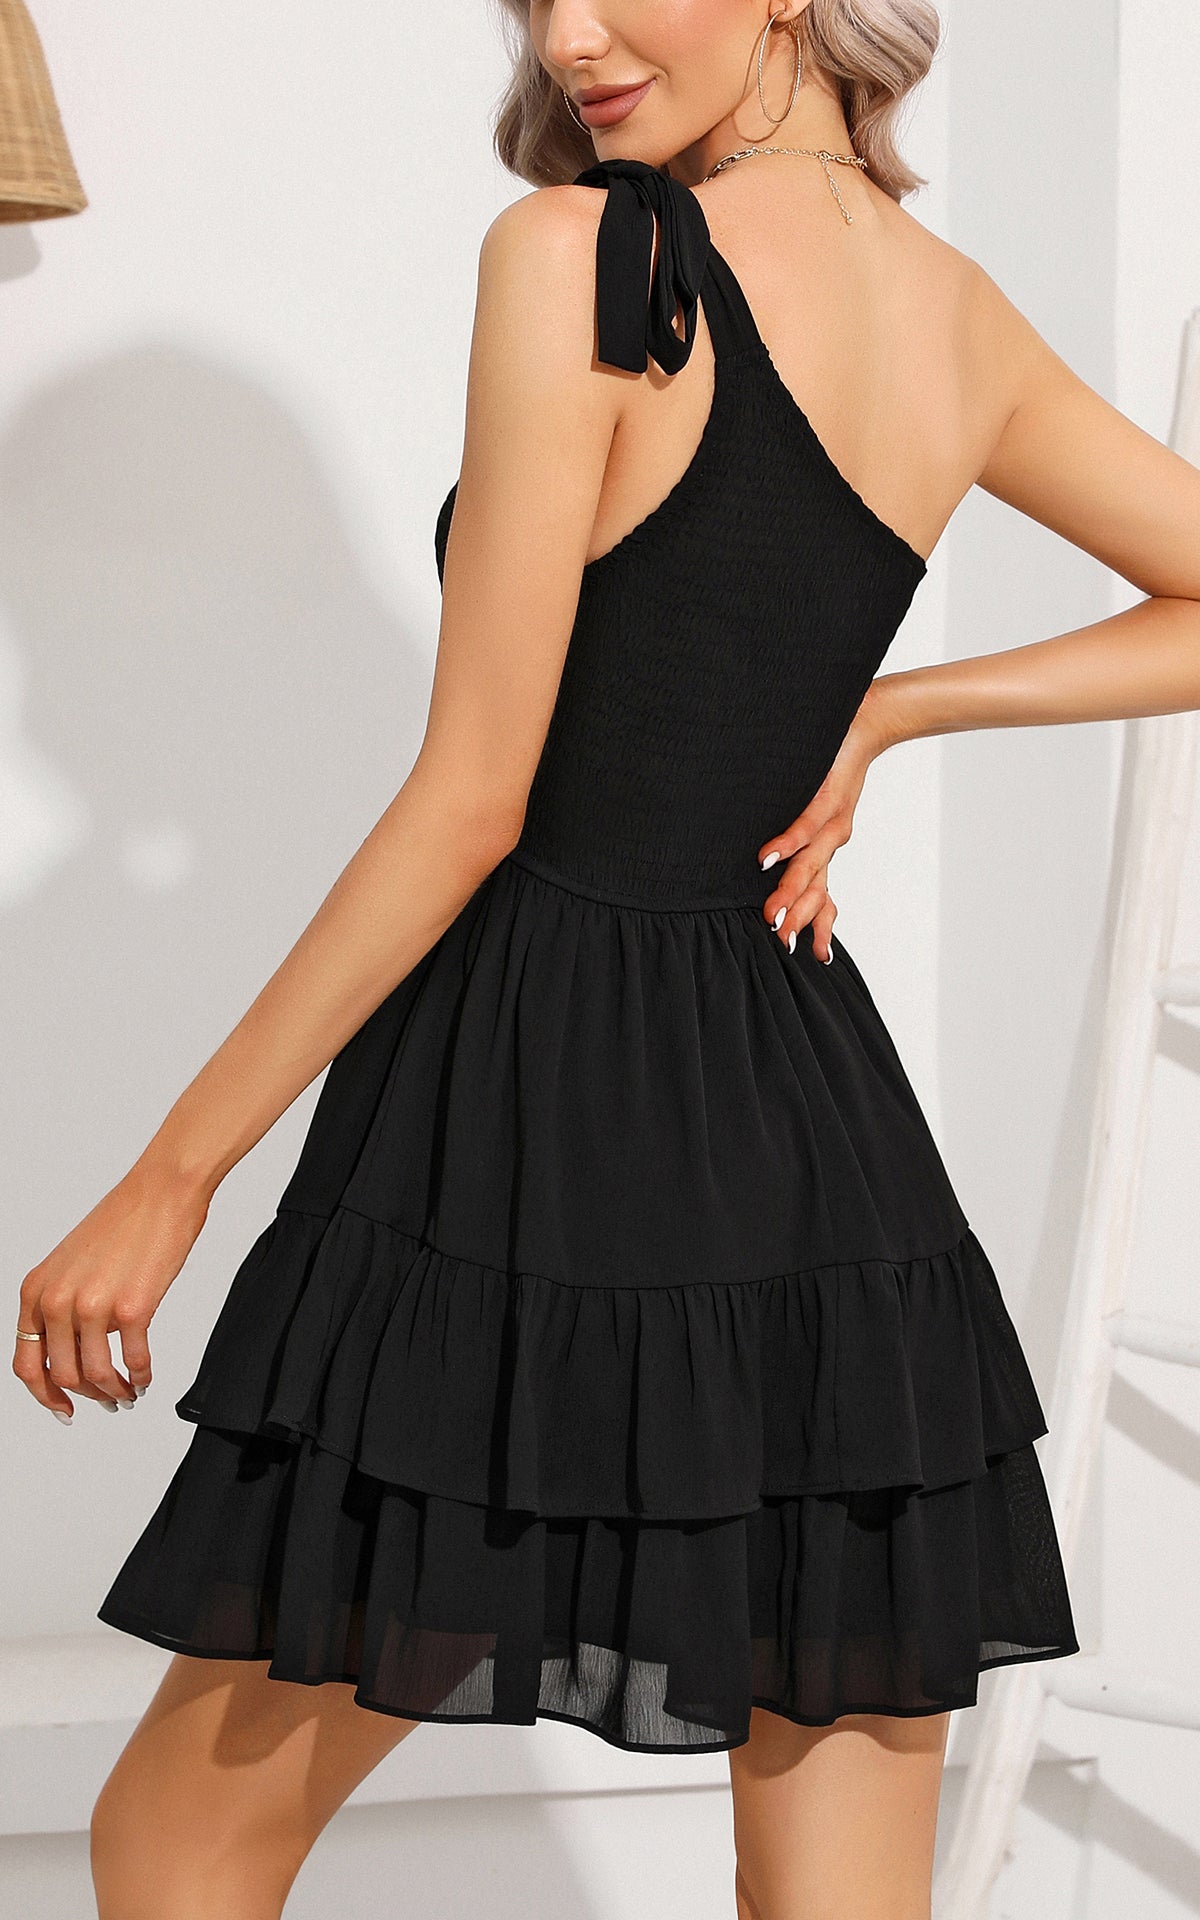 Summer One Shoulder Sleeveless Solid Color Dress Ruffle